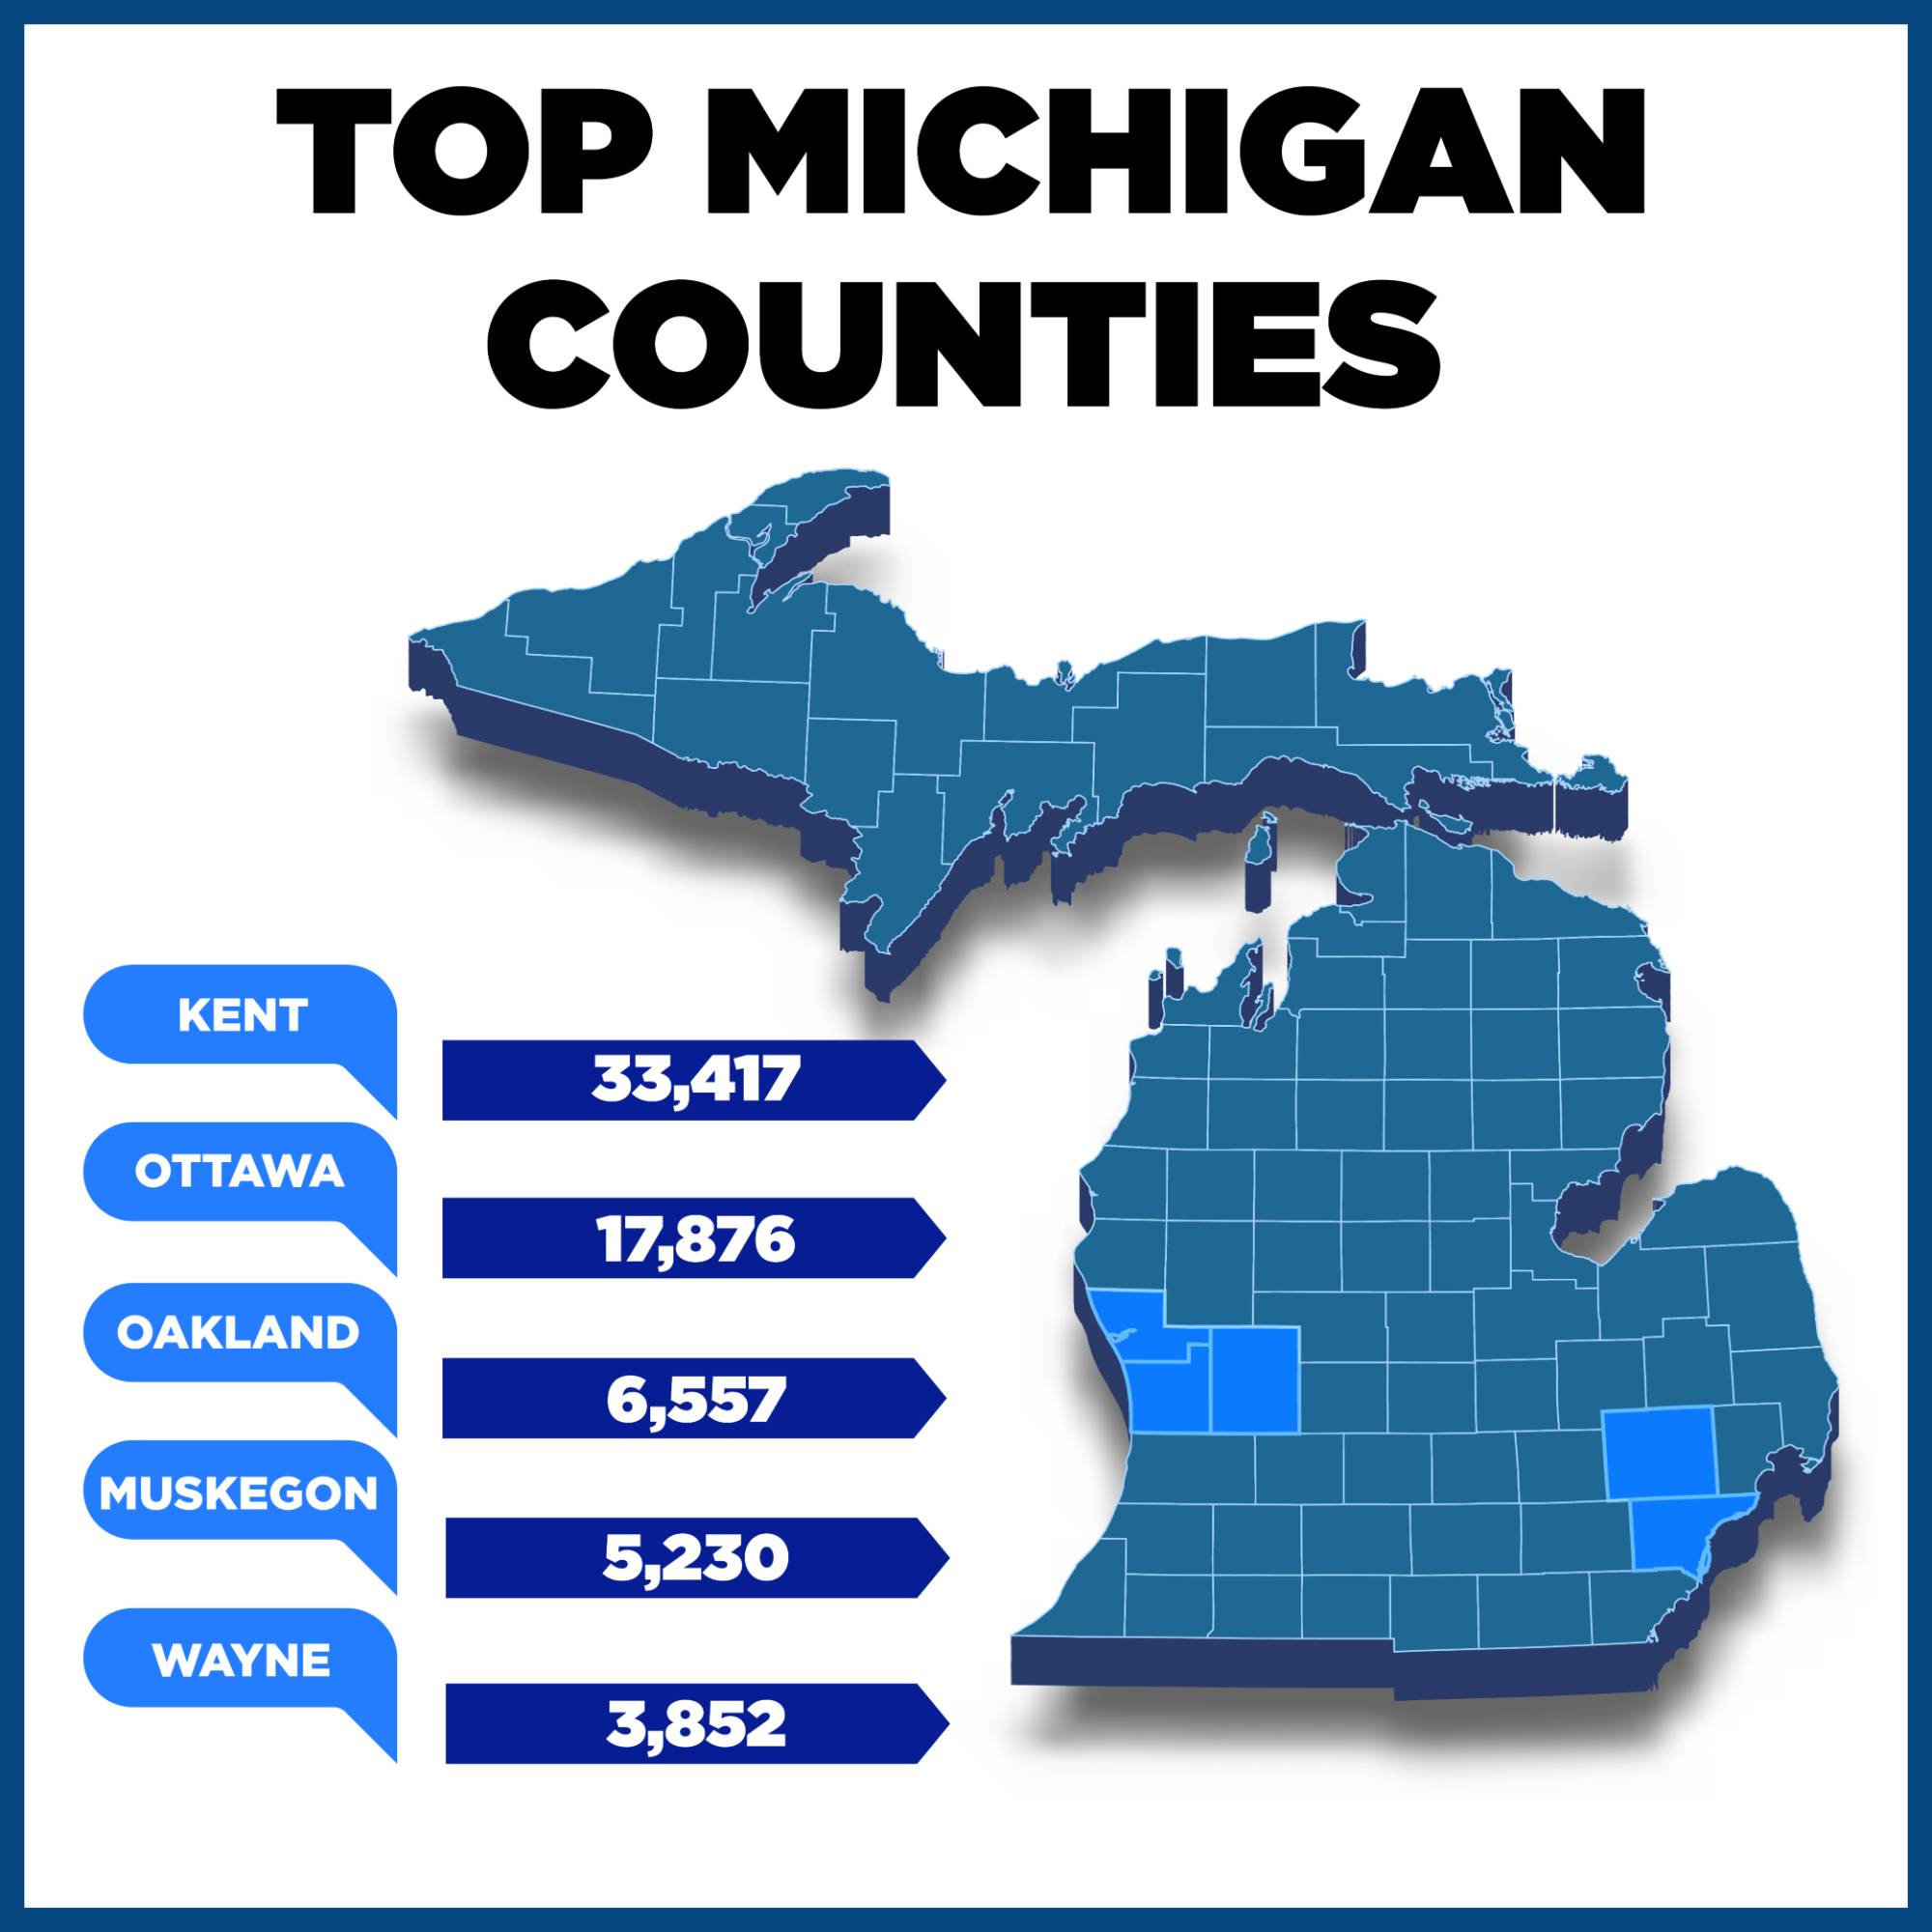 A blue map of Michigan displays the top 5 counties home to GVSU Alumni, which includes; Kent County (33,417), Ottawa County (17,876), Oakland County (6,557), Muskegon County (5,230), and Wayne County (3,852).